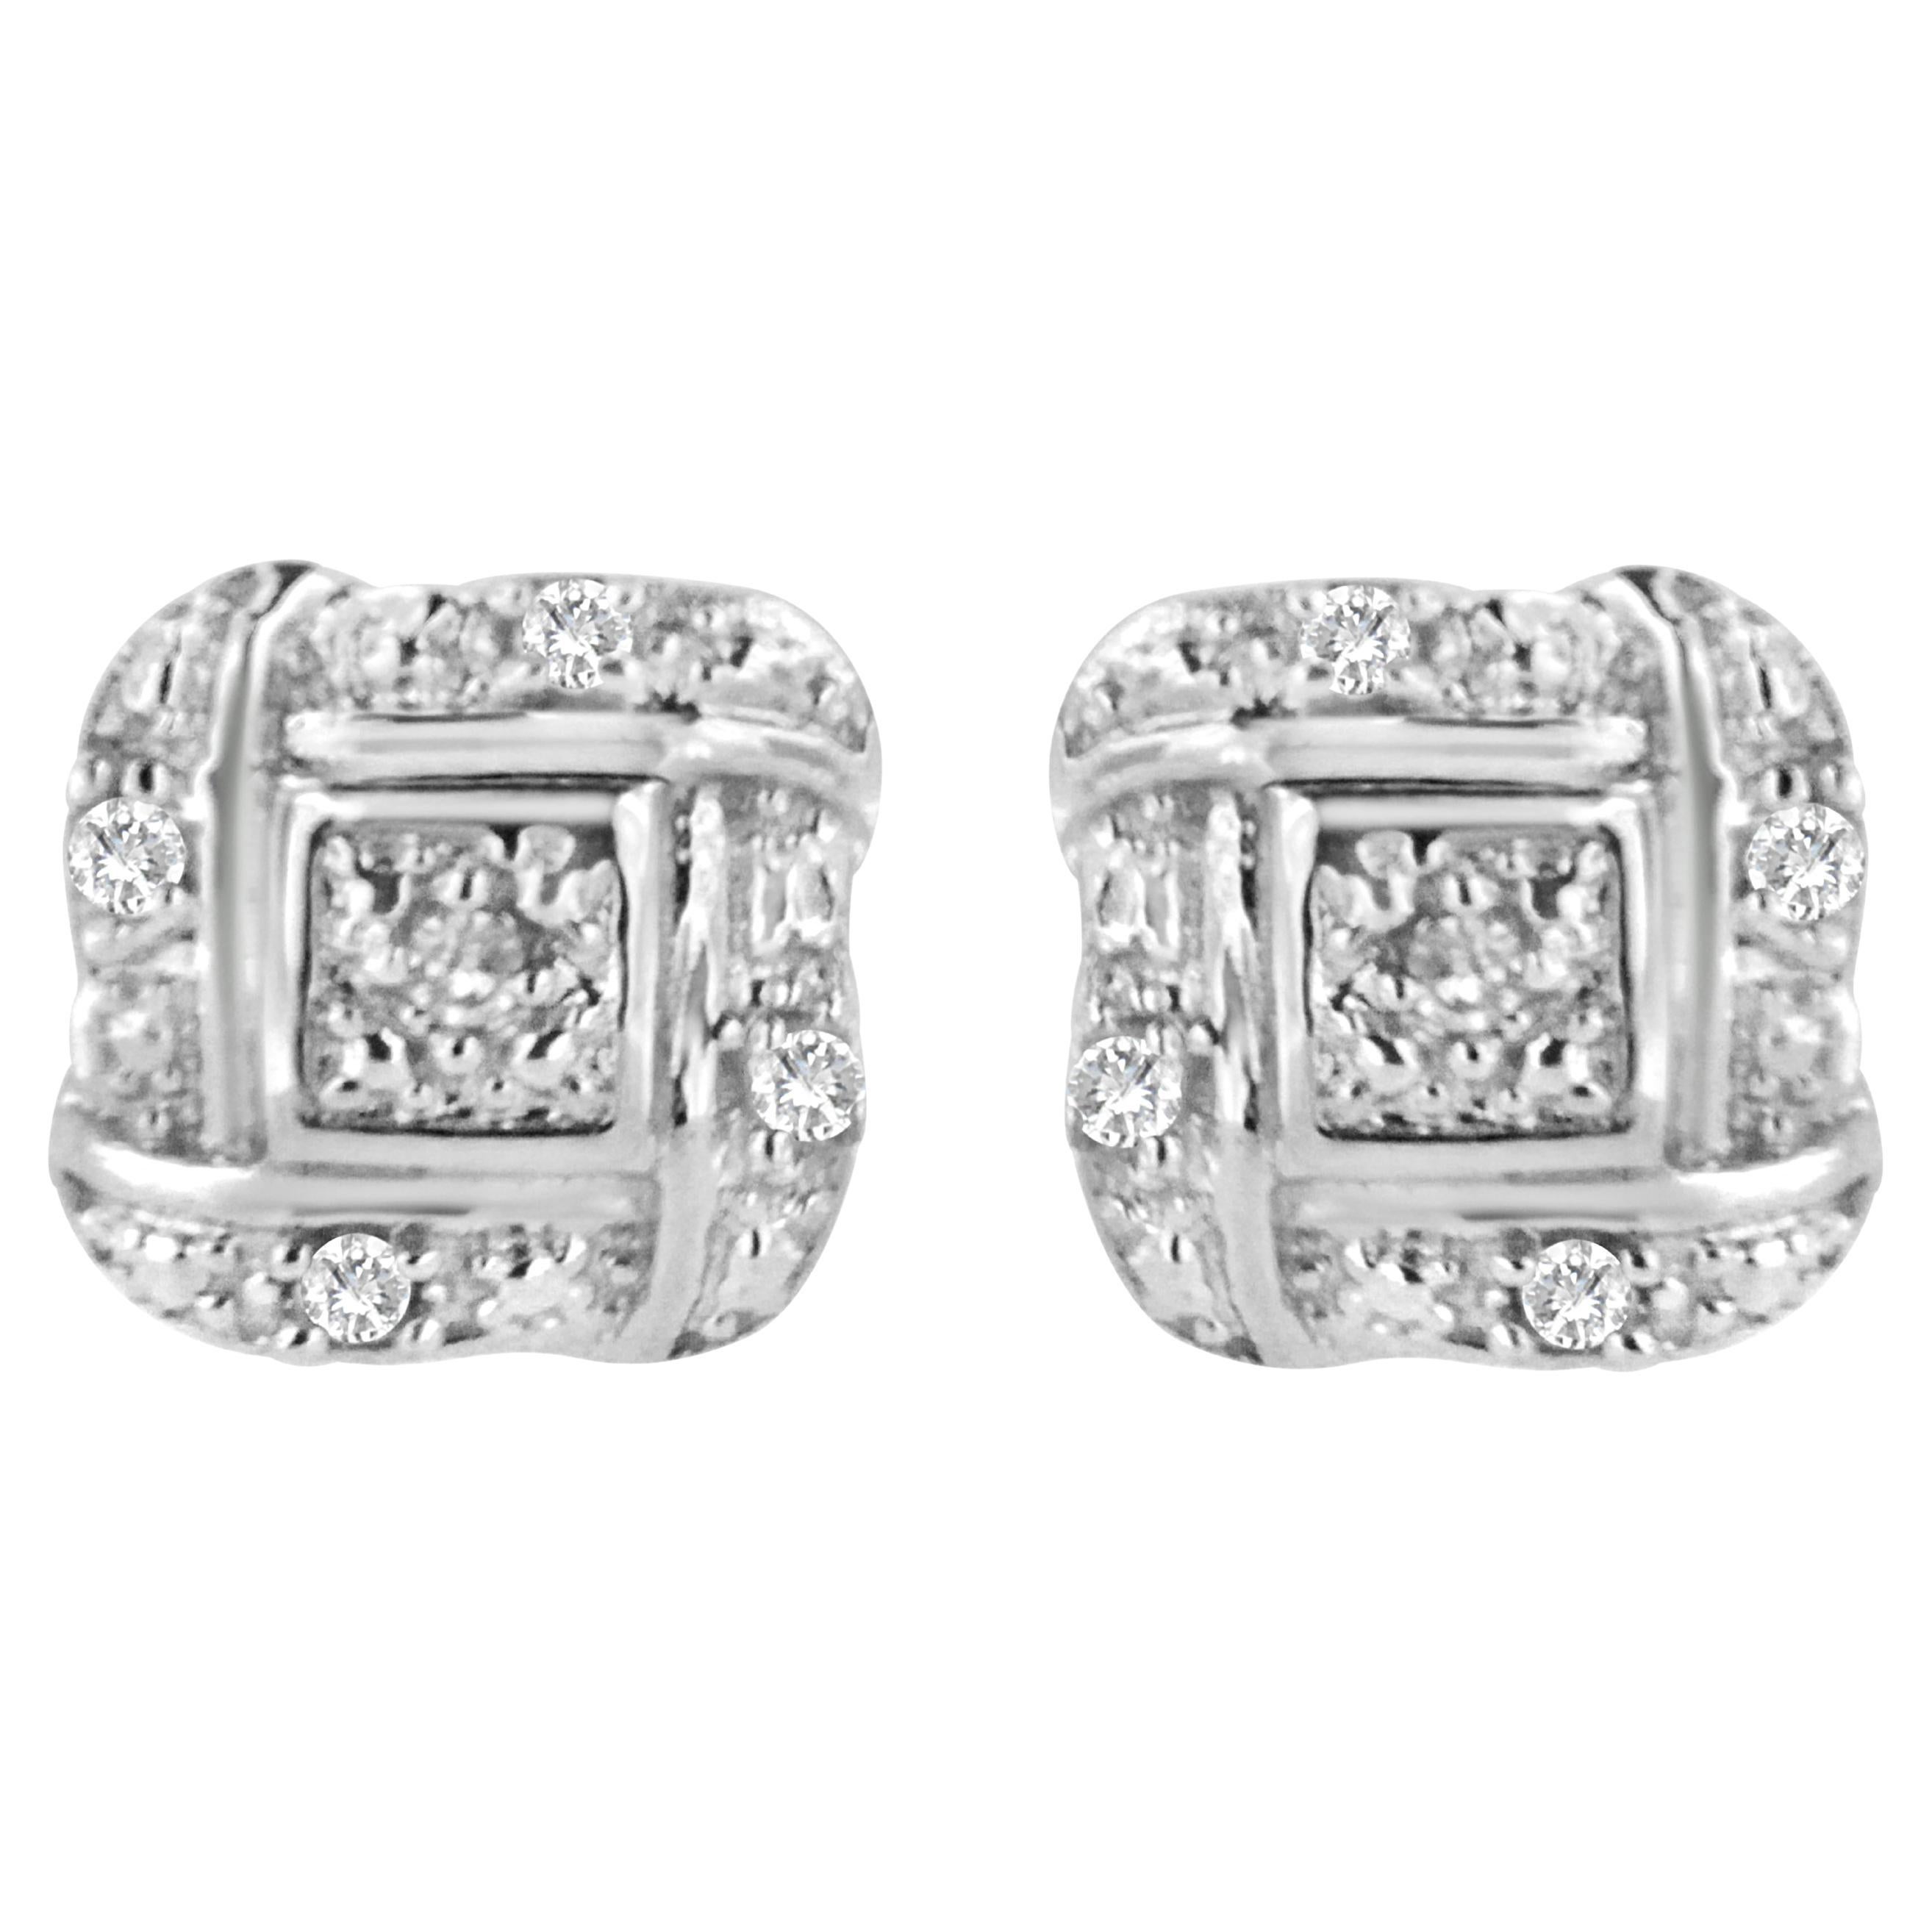 .925 Sterling Silver Round-Cut Diamond Accent Swirl Square Knot Stud Earrings For Sale